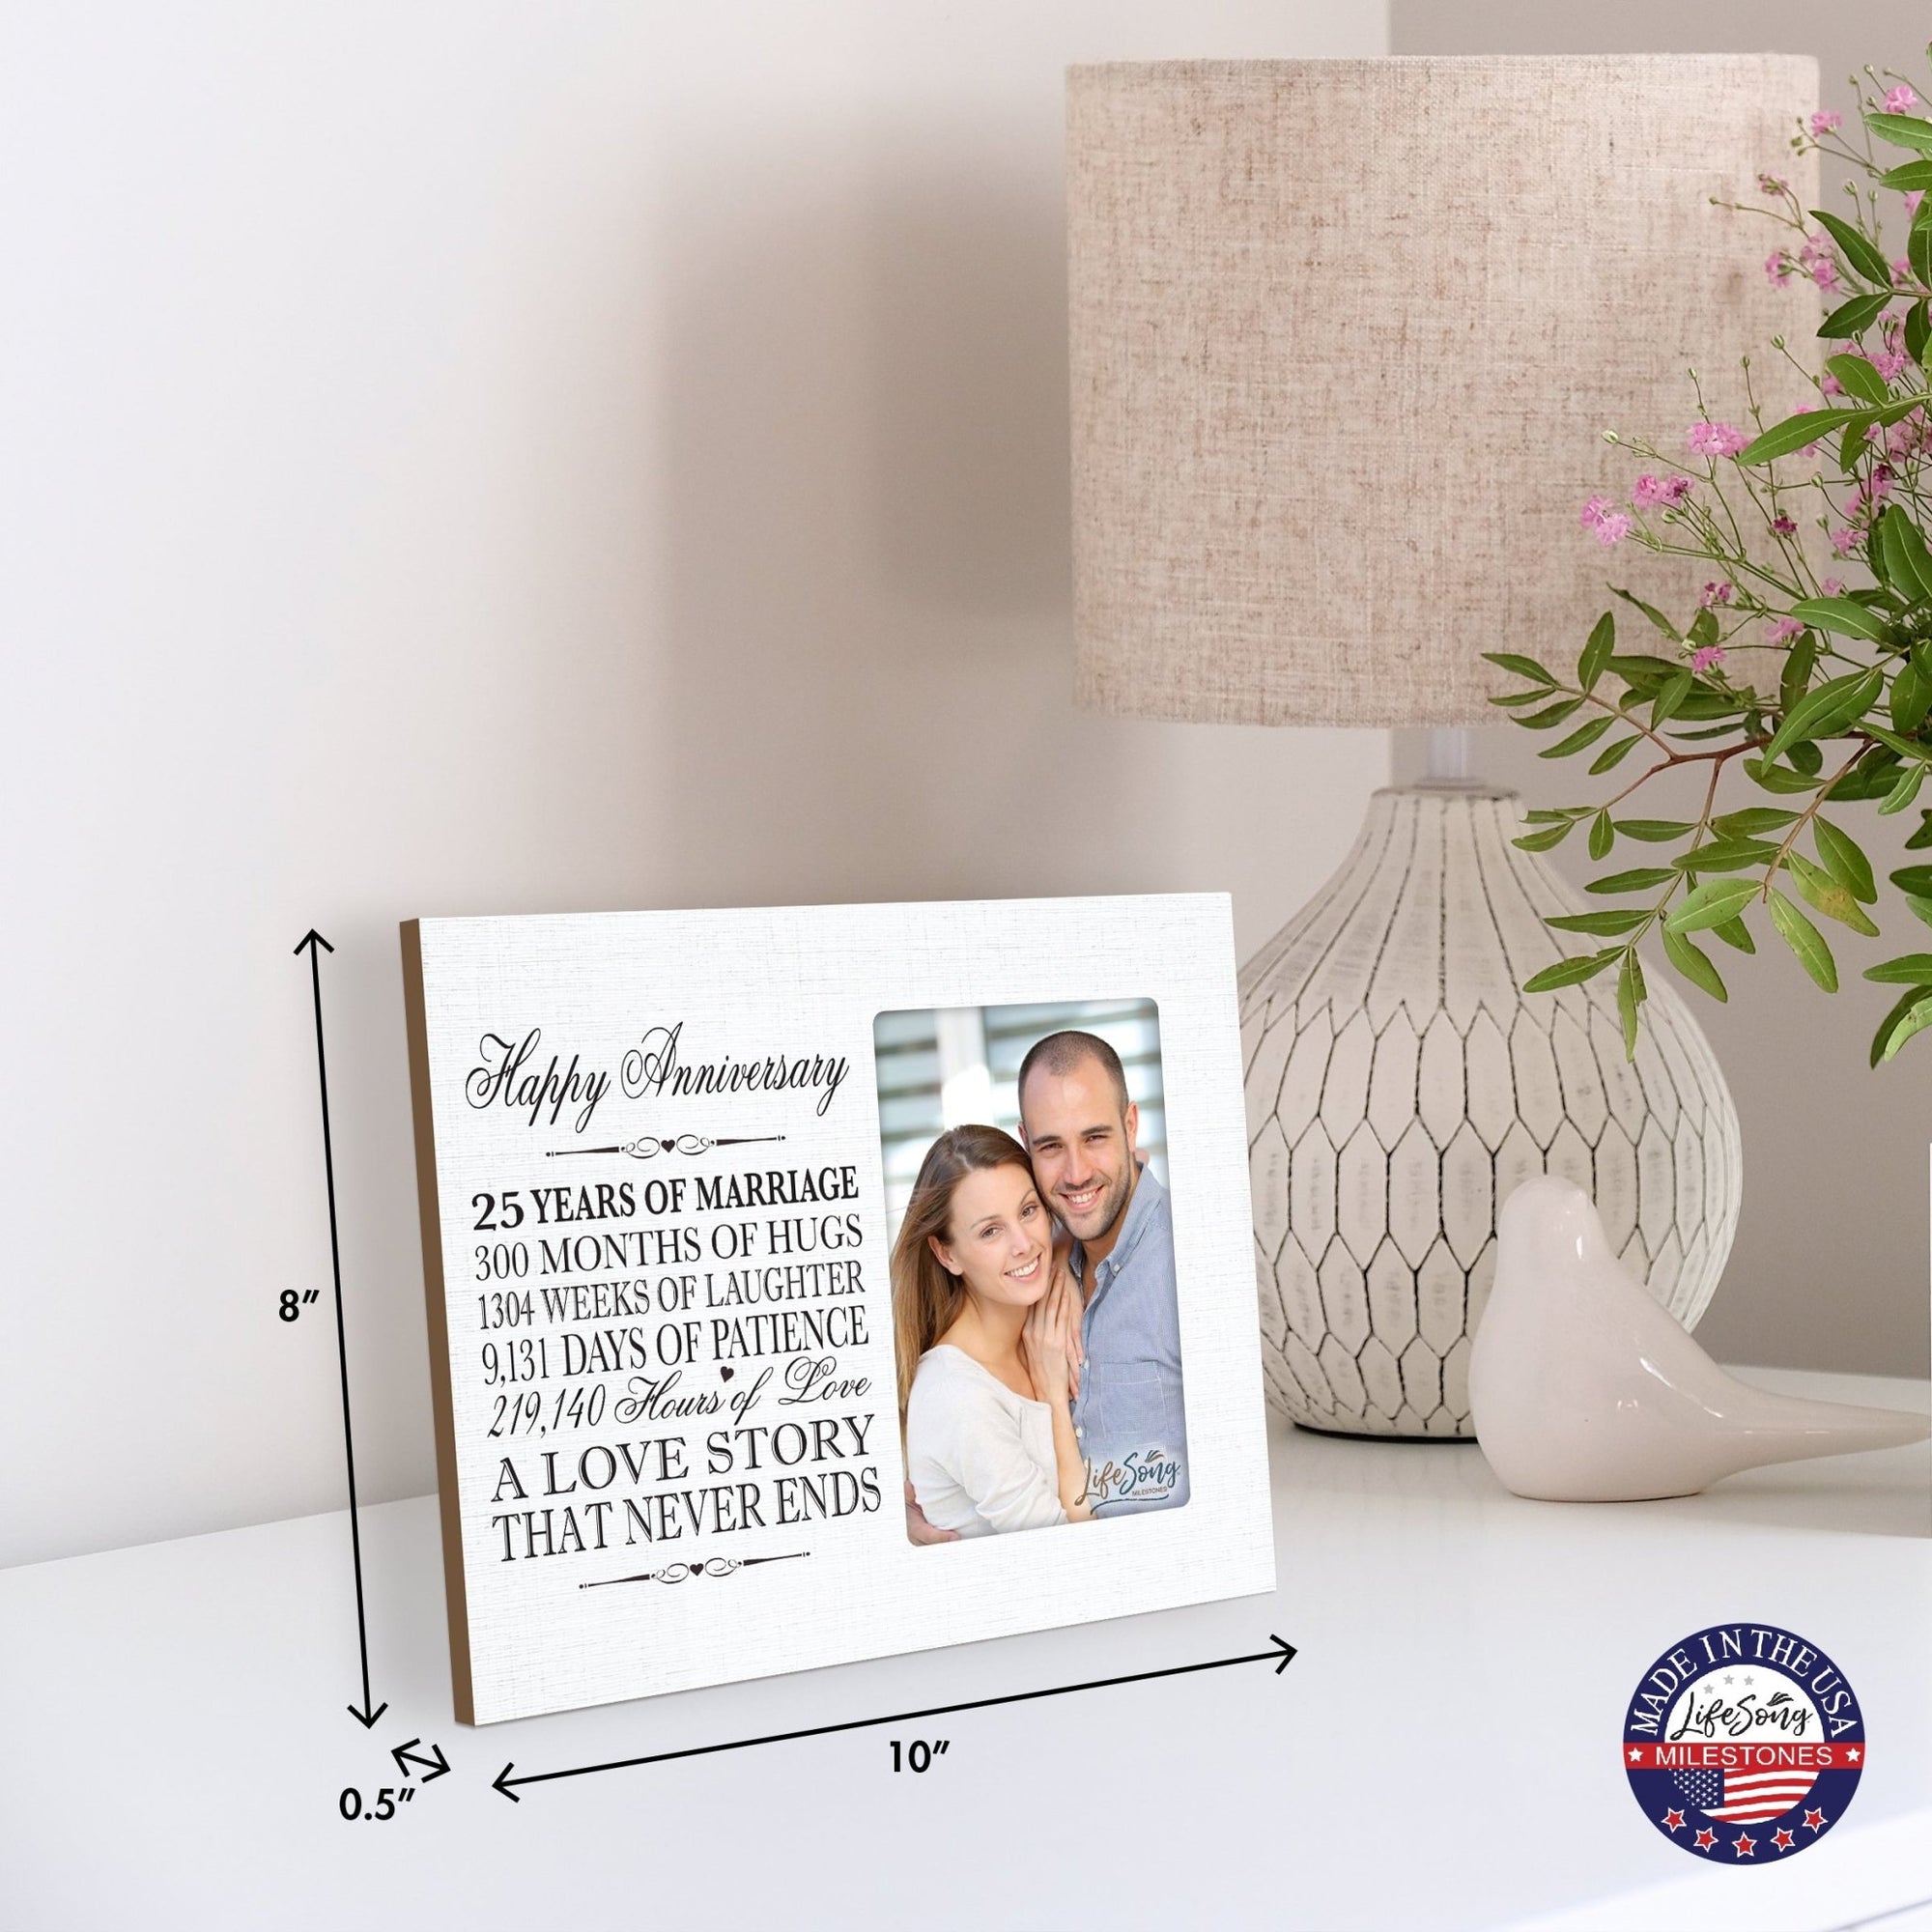 Couples Unique 25th Wedding Anniversary Photo Frame Decorations - A Love Story - LifeSong Milestones